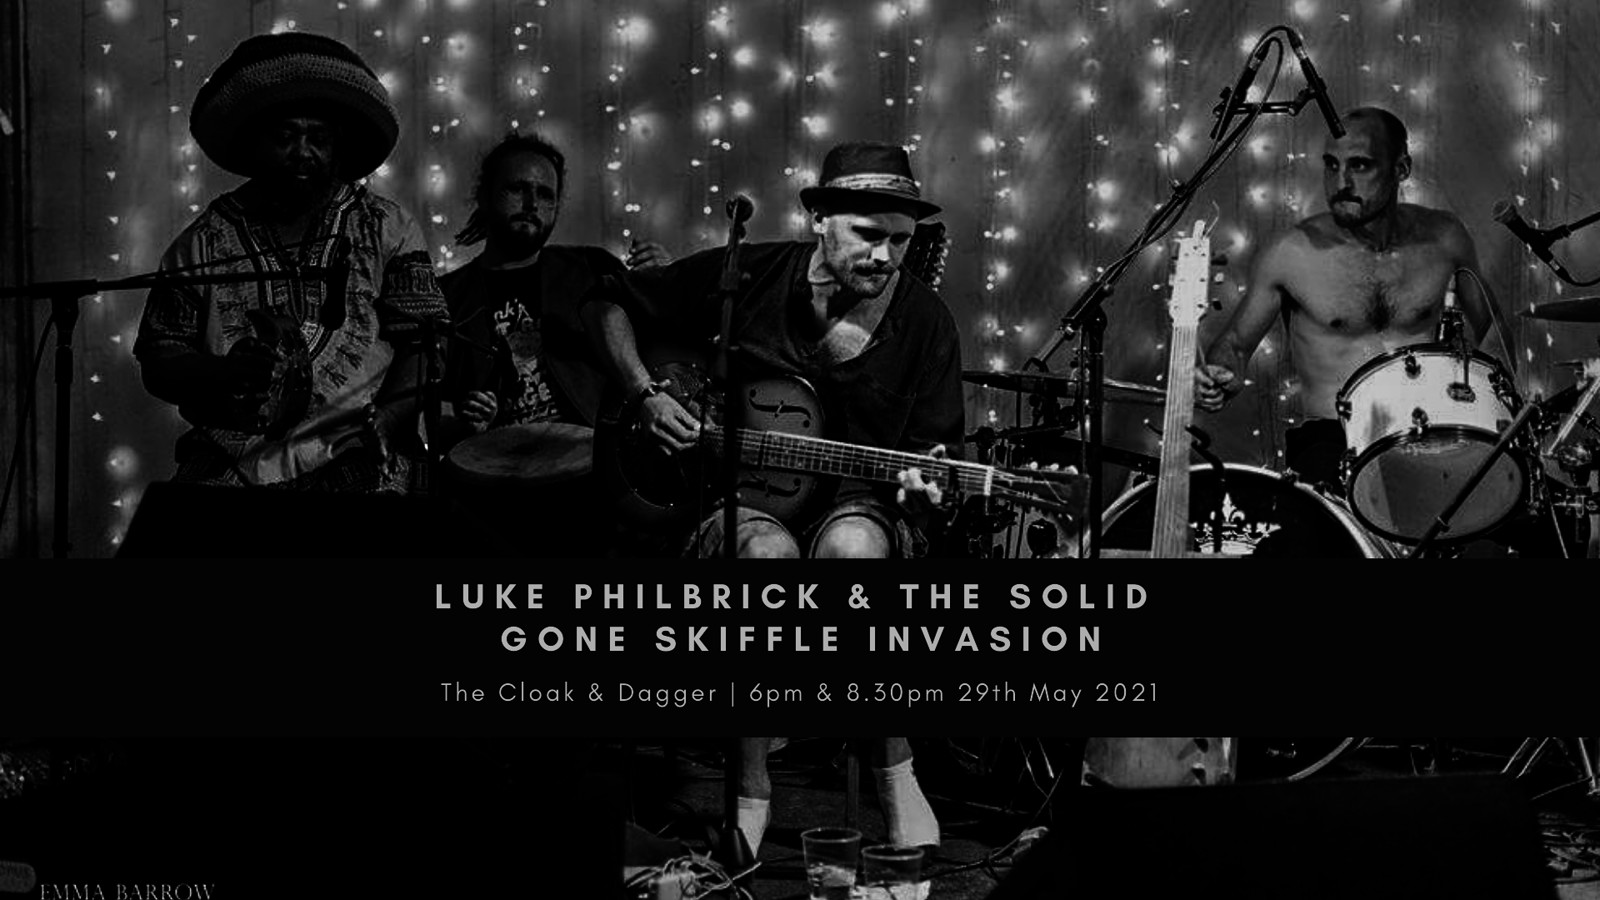 Luke Philbrick & The Solid Gone Skiffle Invasion at The Cloak and Dagger